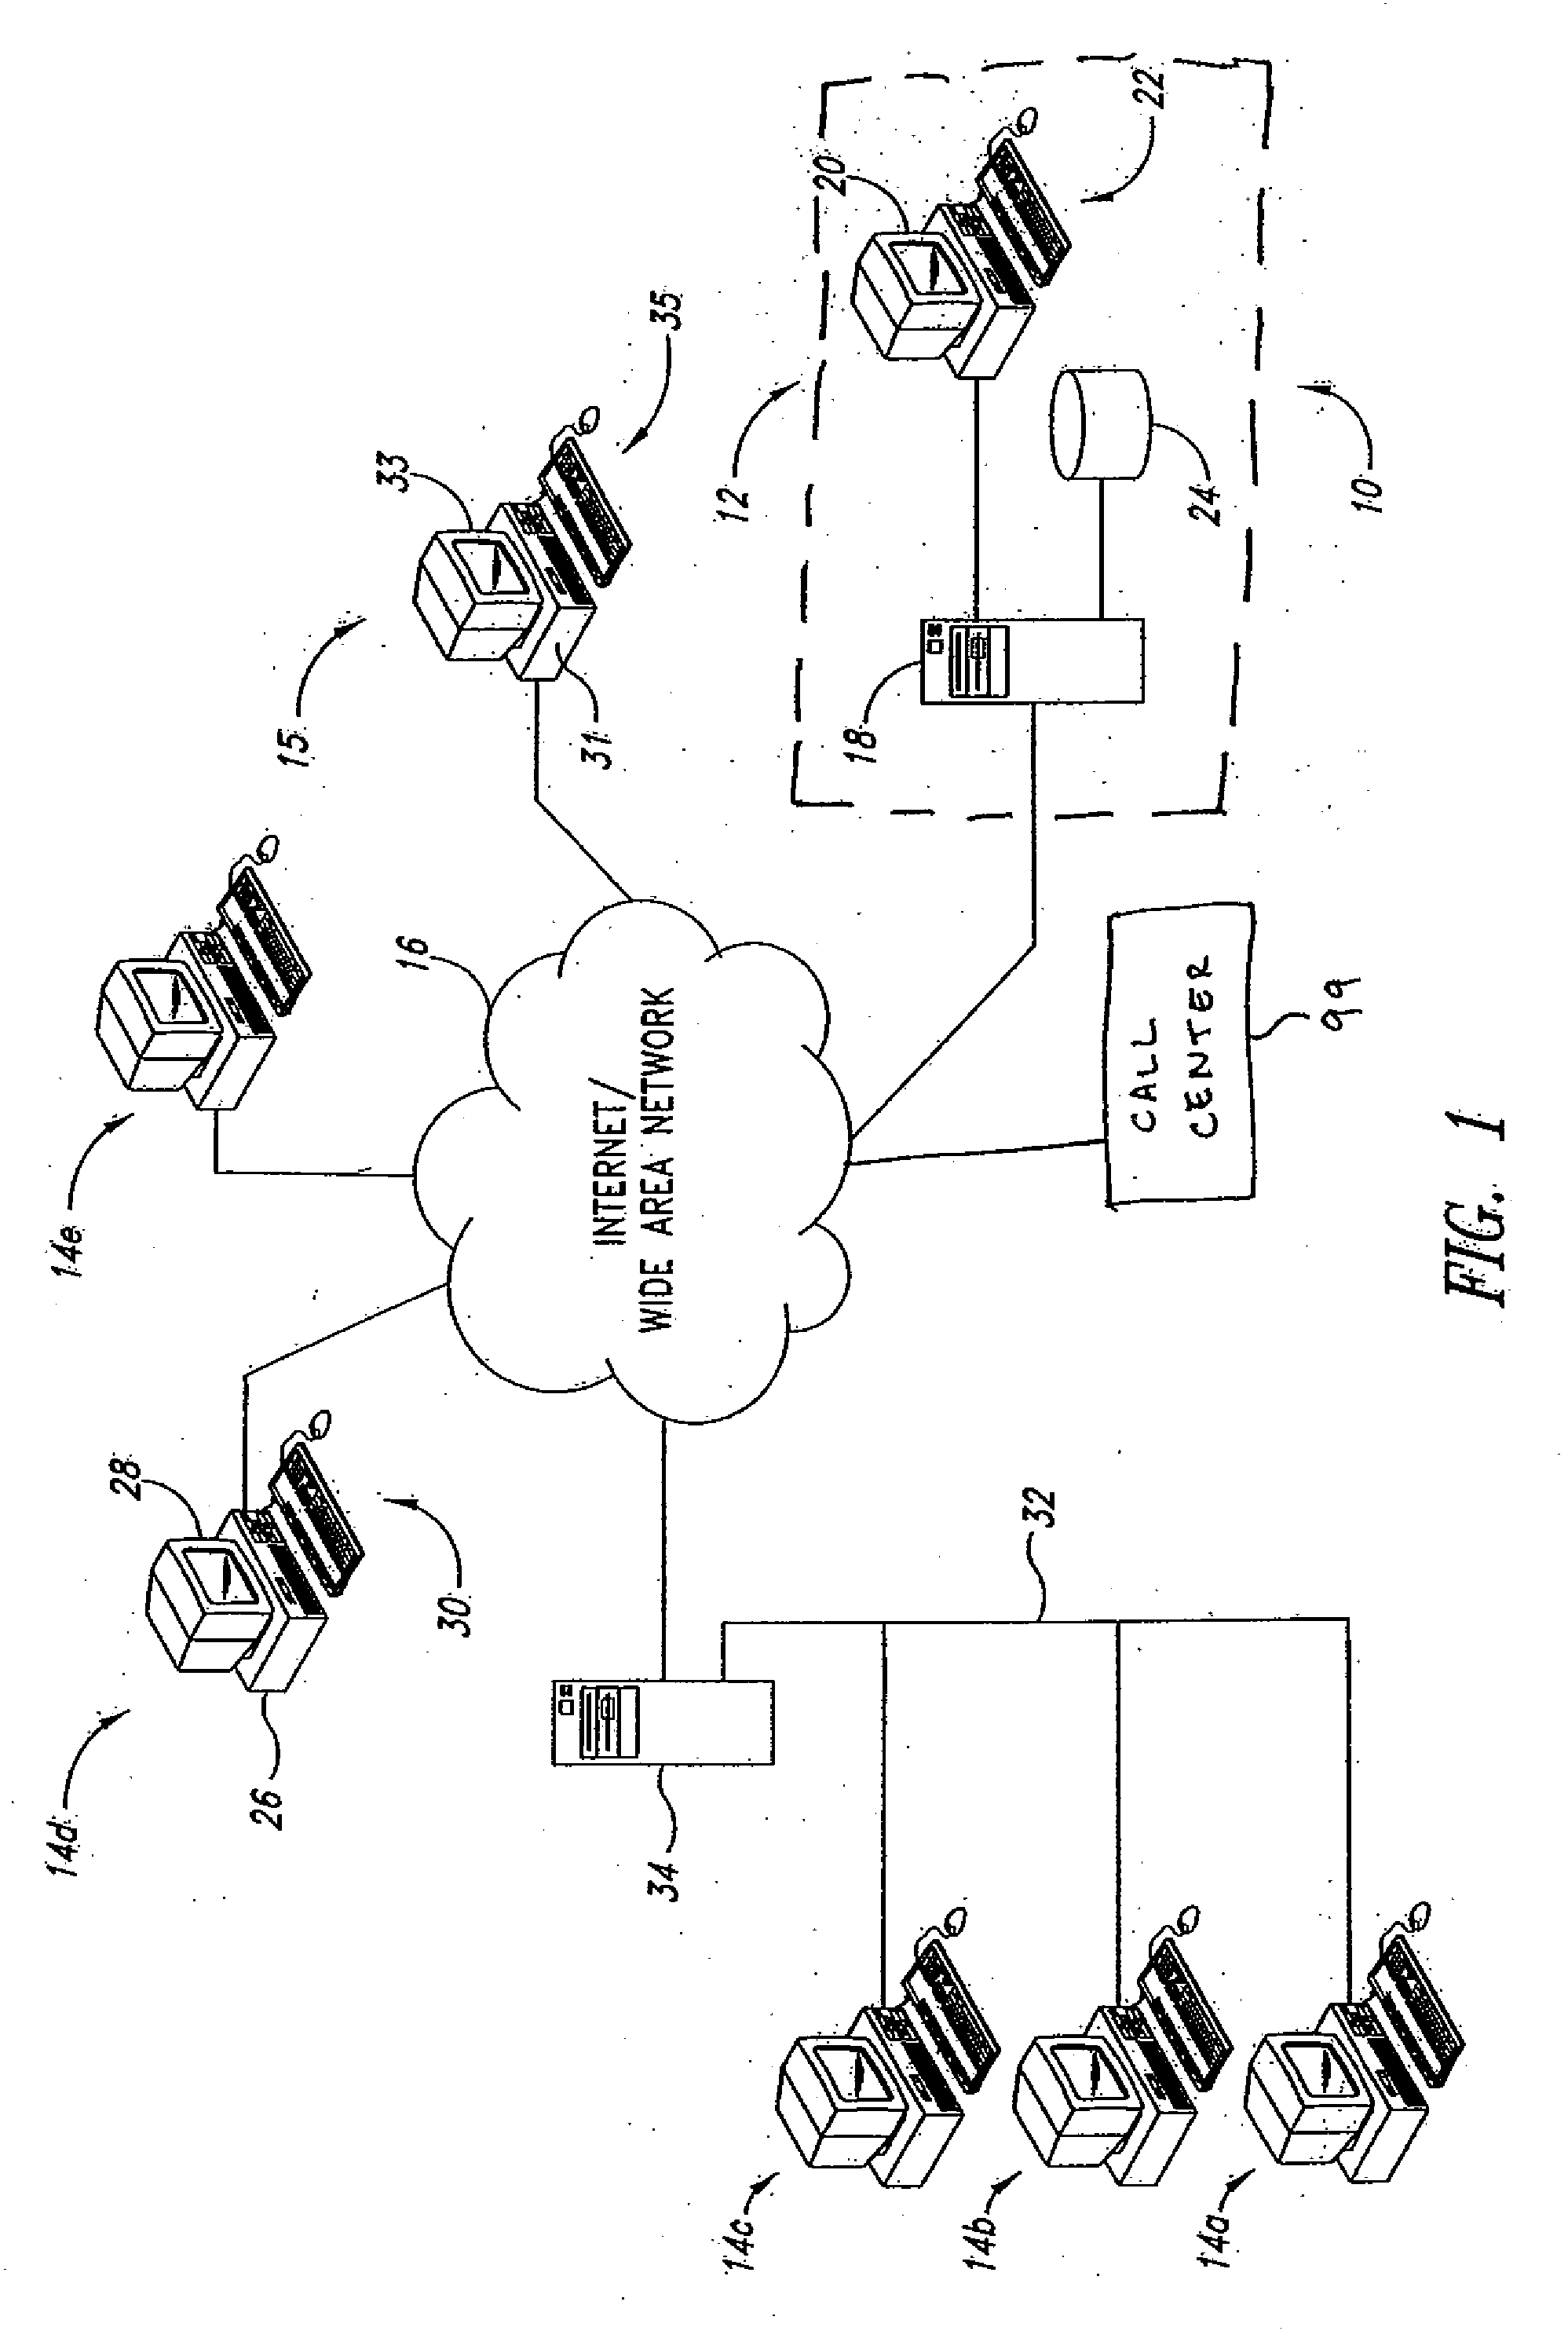 Method and system to use a telephone extension number to identify a session, such as an internet session that browses real estate information